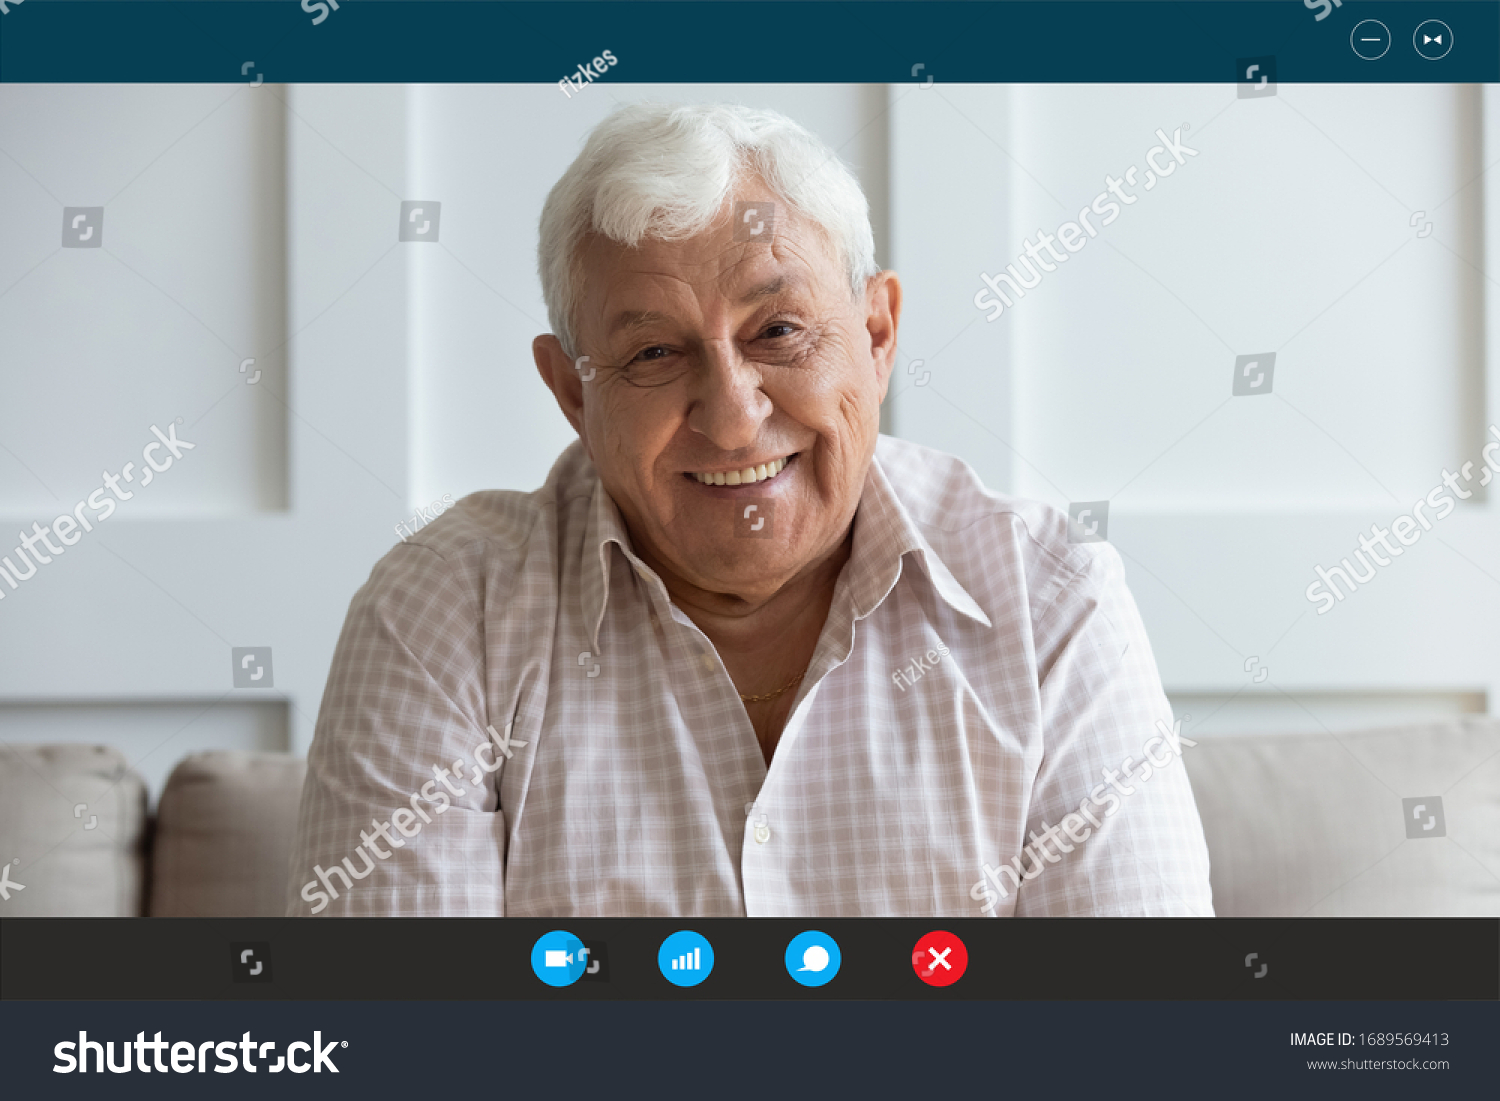 Headshot portrait screen view of smiling senior grandfather talk on video call on laptop with relatives or kids, happy elderly man speak have pleasant online Webcam conversation on computer at home #1689569413